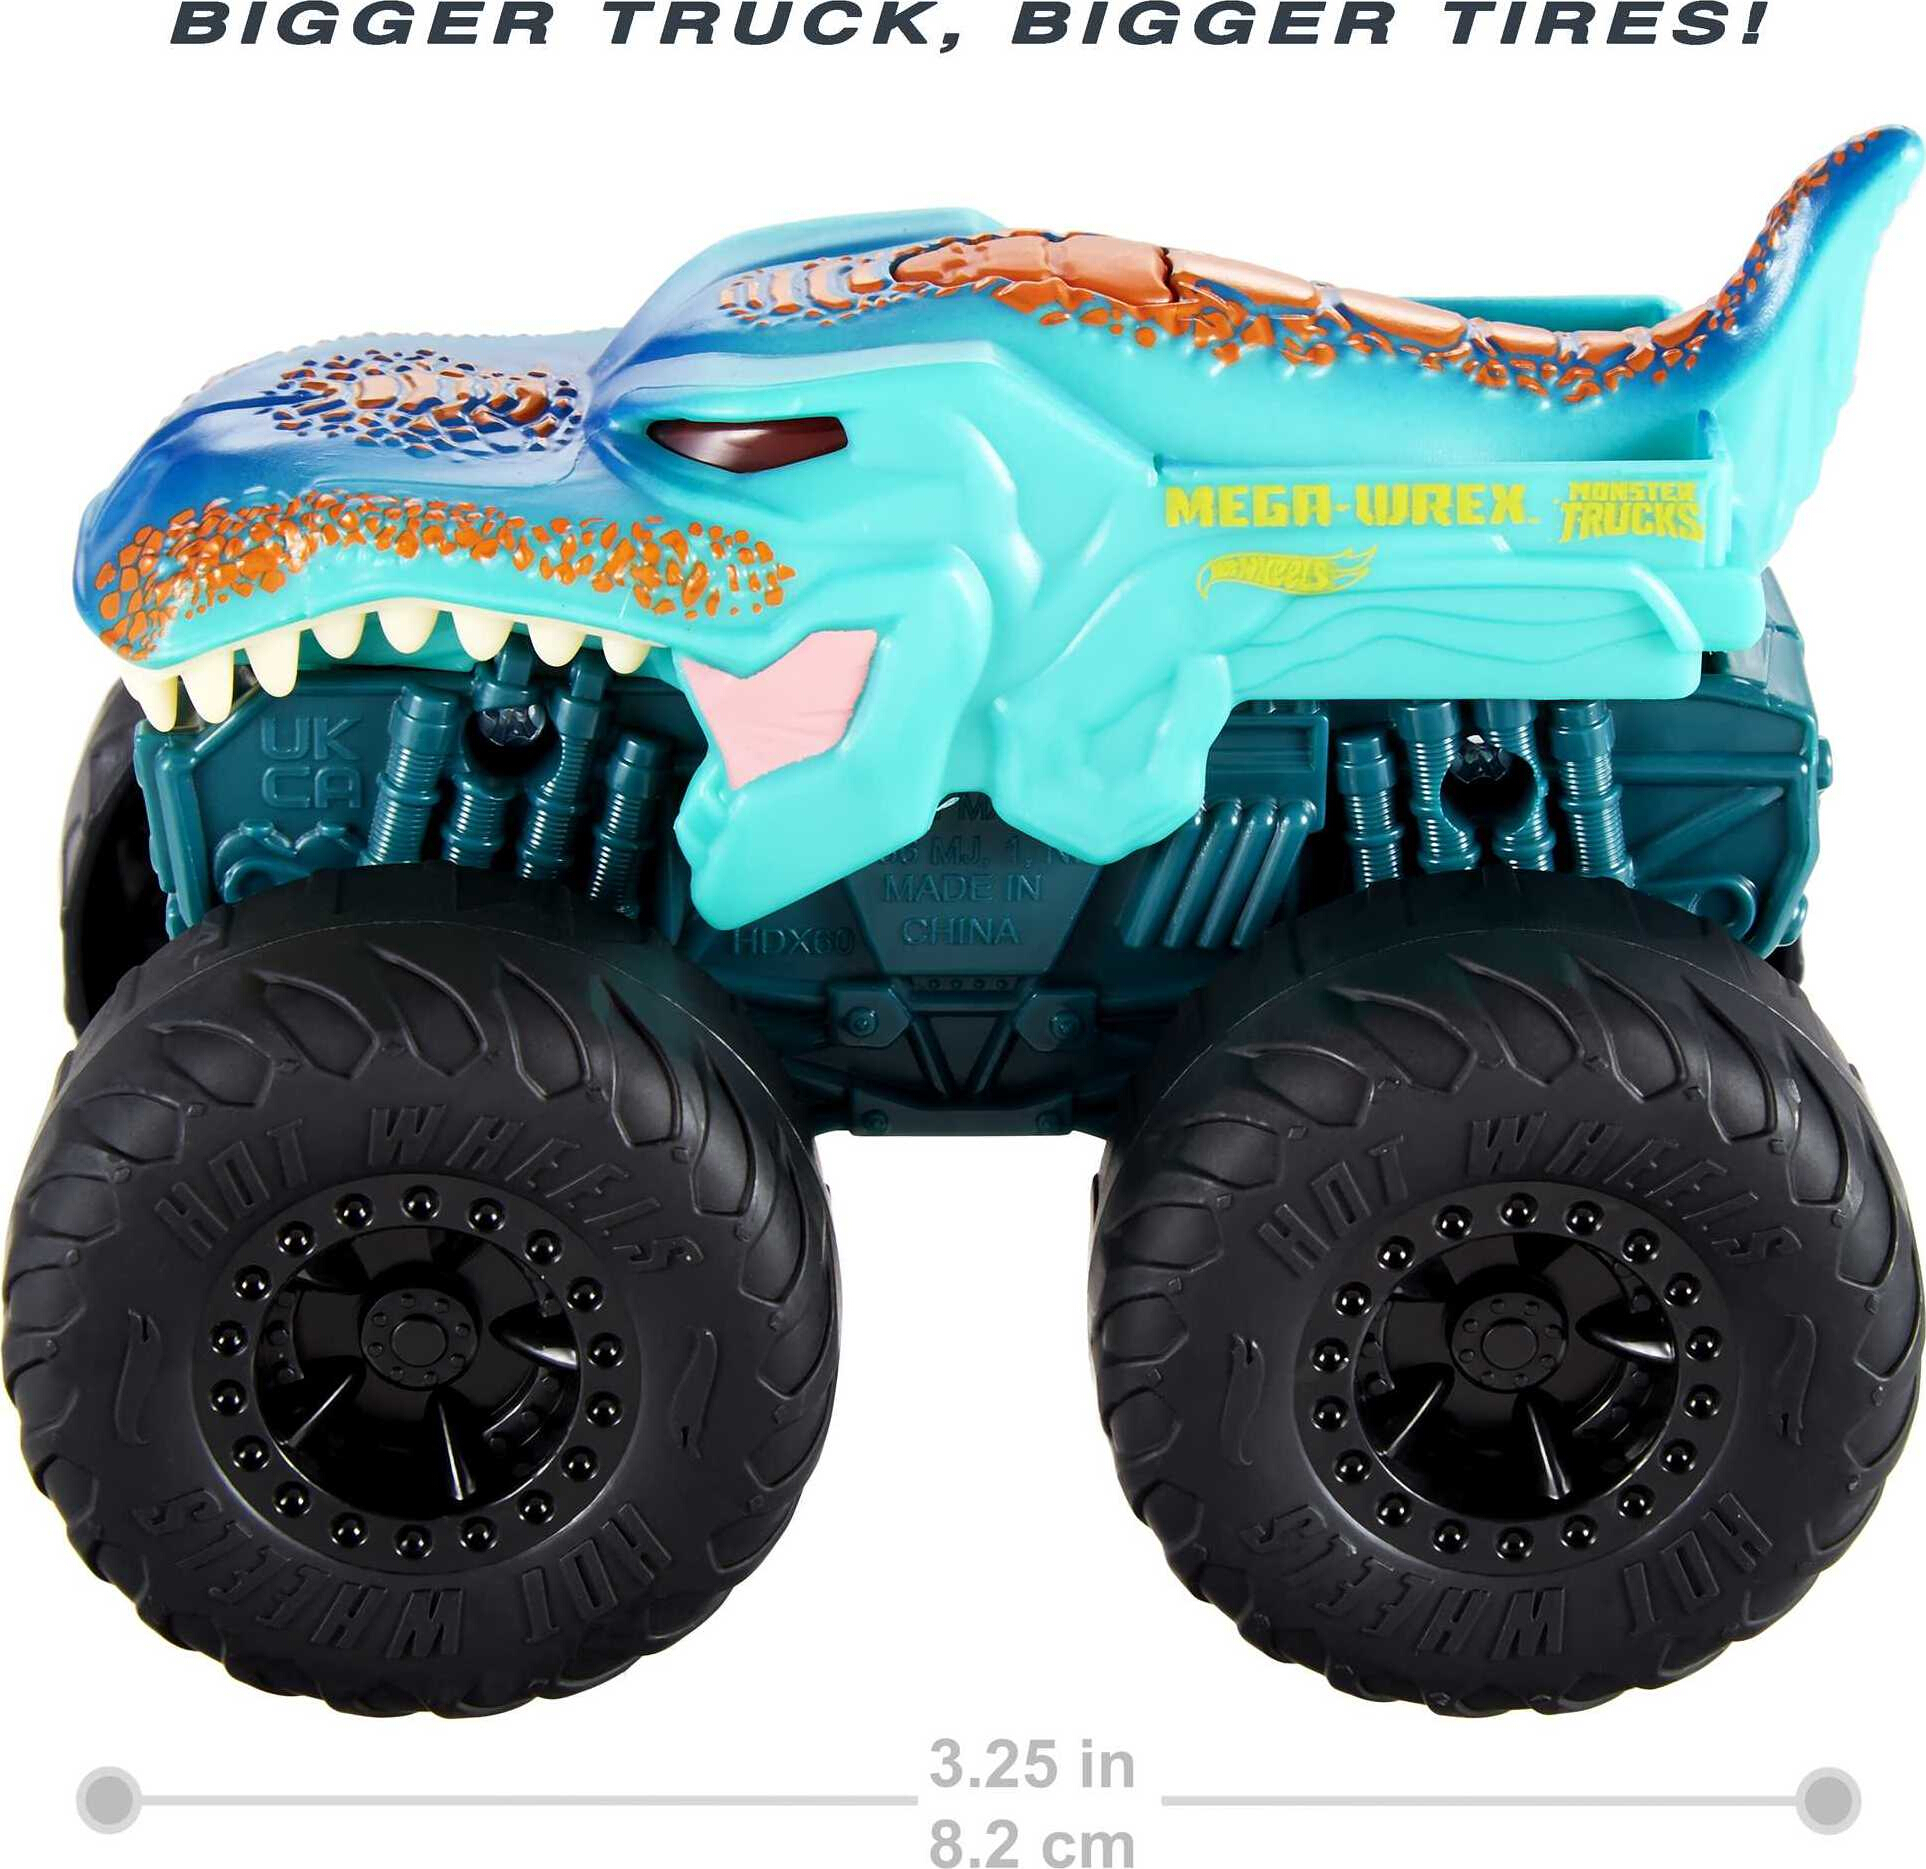 Hot Wheels Monster Trucks Roarin' Wreckers, 1:43 Scale Mega-Wrex Toy Truck  with Lights & Sounds